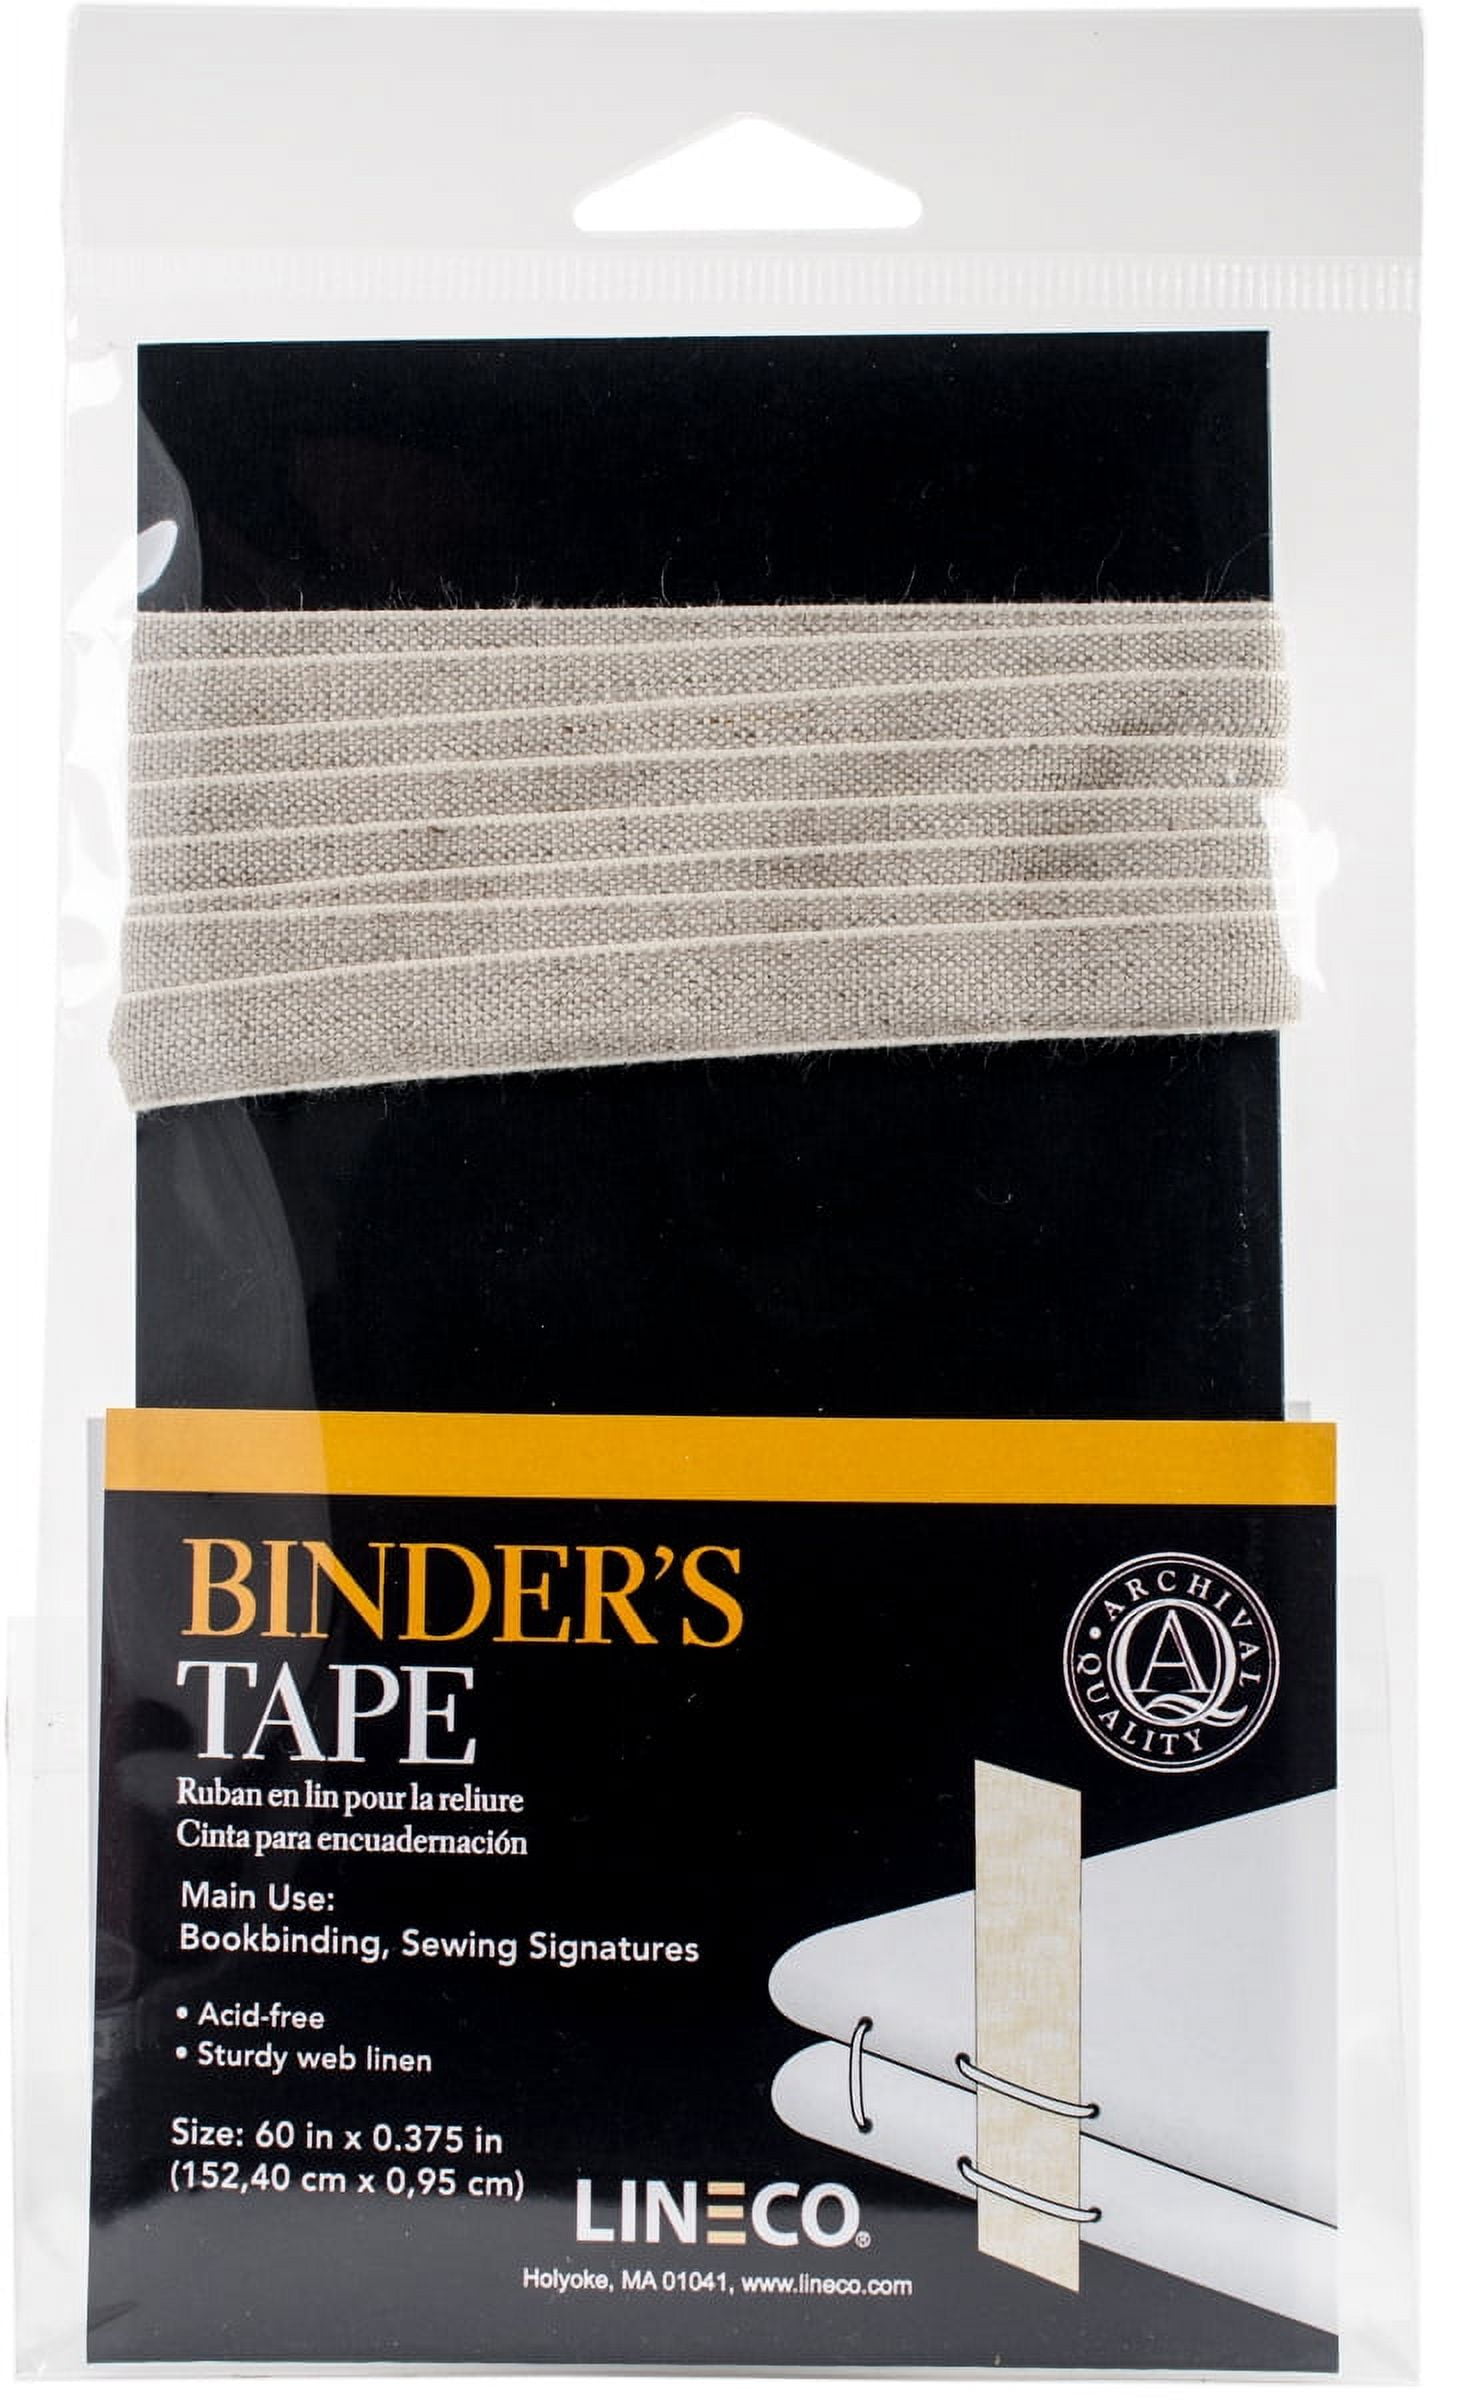 Lineco Acid-Free Sturdy Web Linen Binding Book Tape, Binder's Tape Ideal  for Bookbinding, Sewing Signatures, Book Conservator, or Book Arts  Enthusiast, 60in x 3/8 in, Neutral Color.